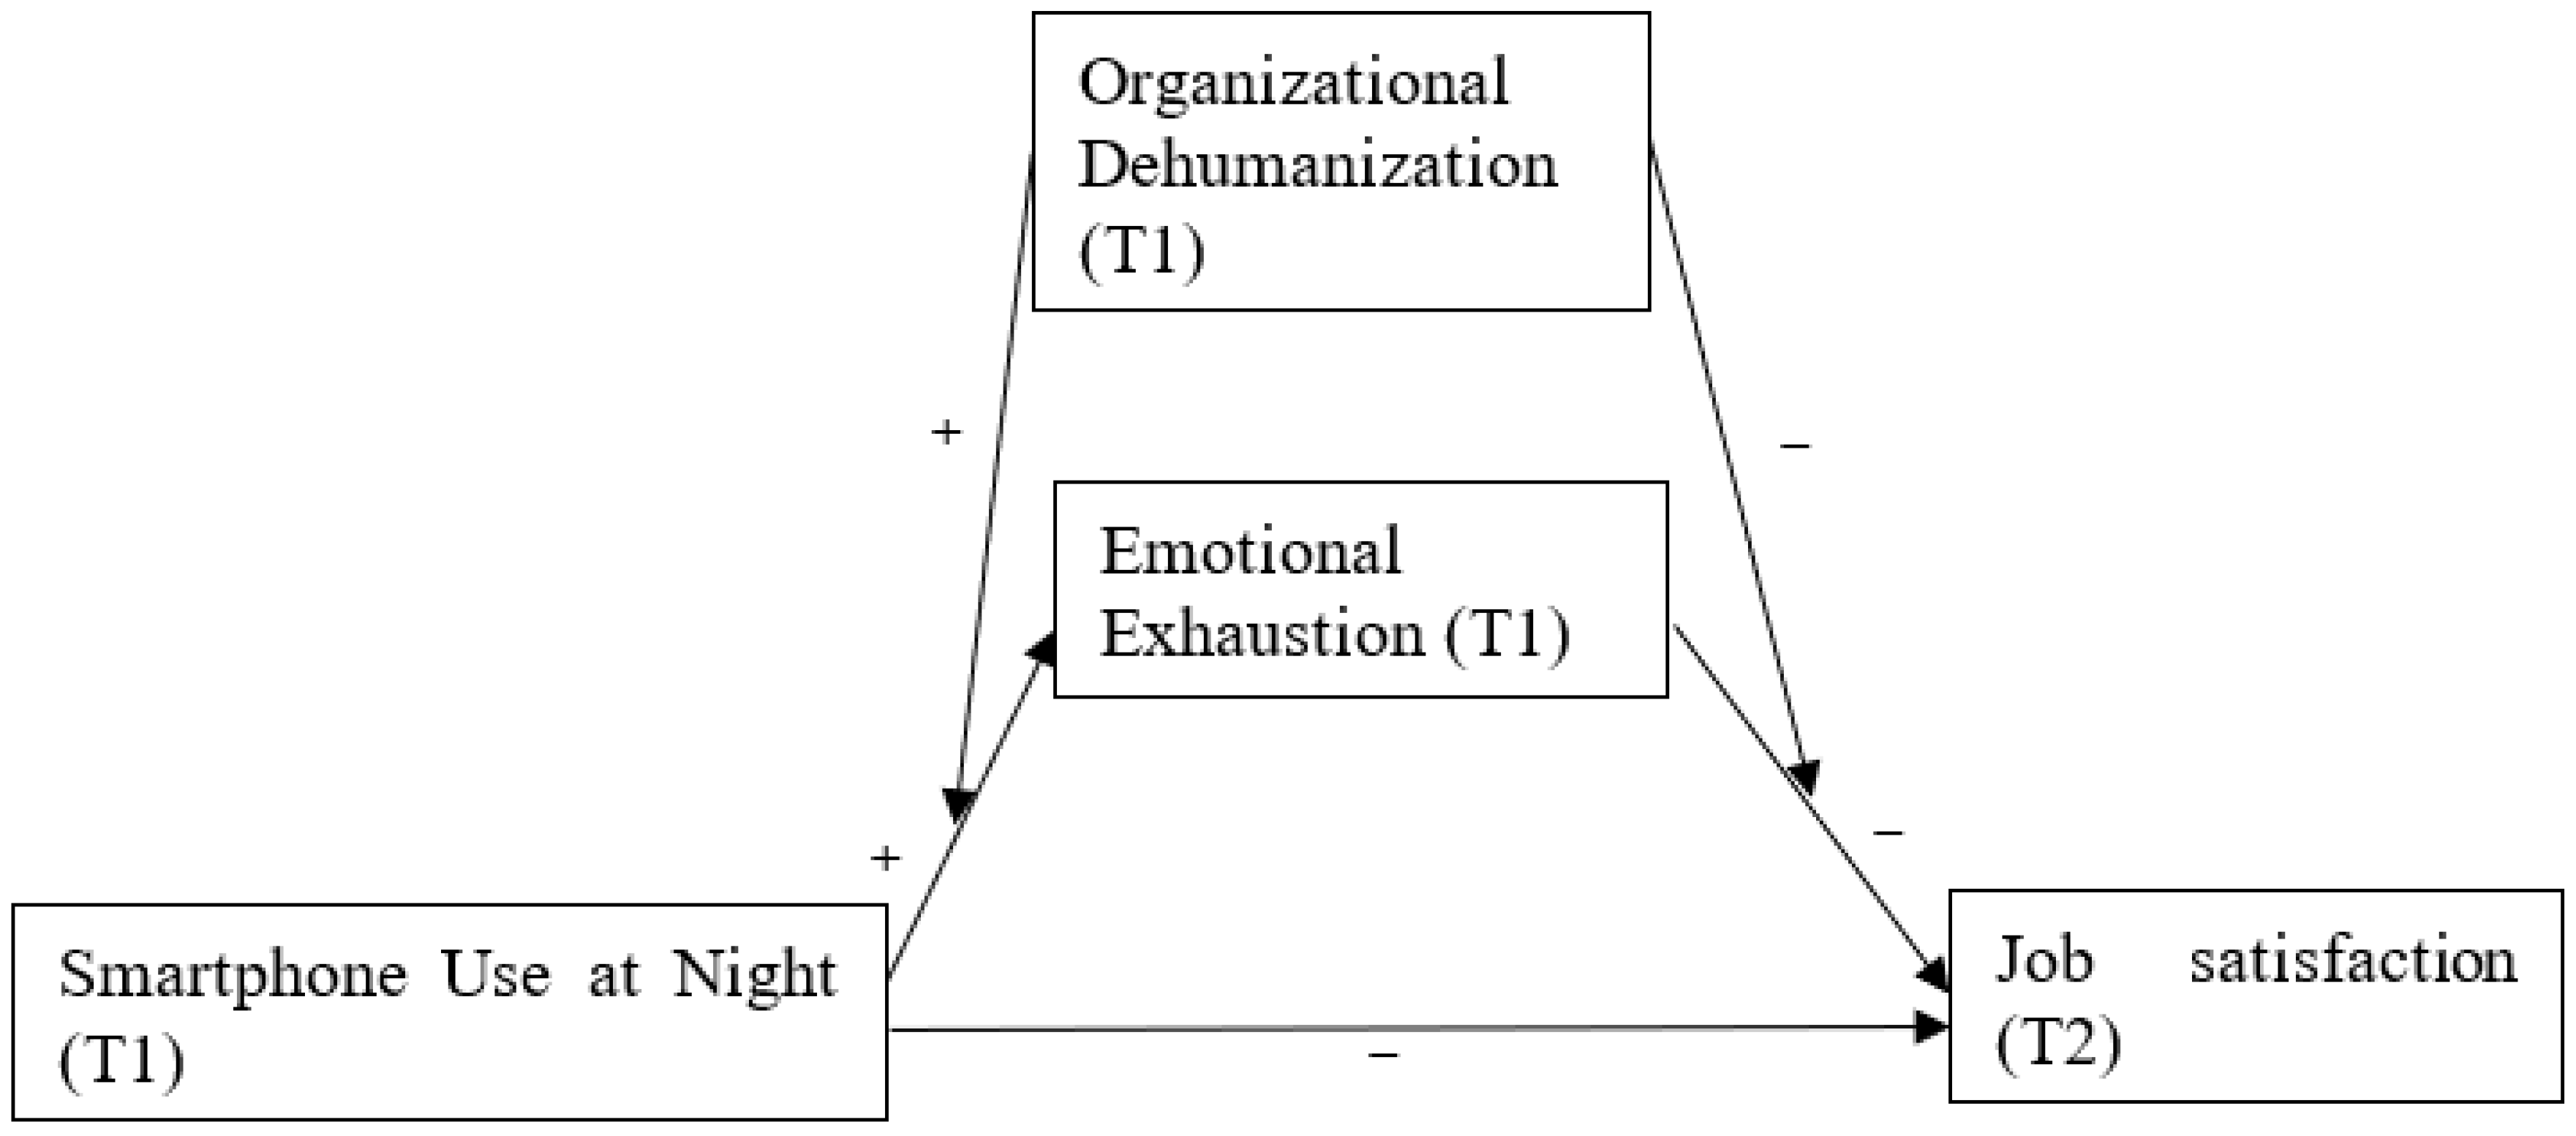 Conceptual moderated mediation model. T1 = Time 1; T2 = Time 2. The